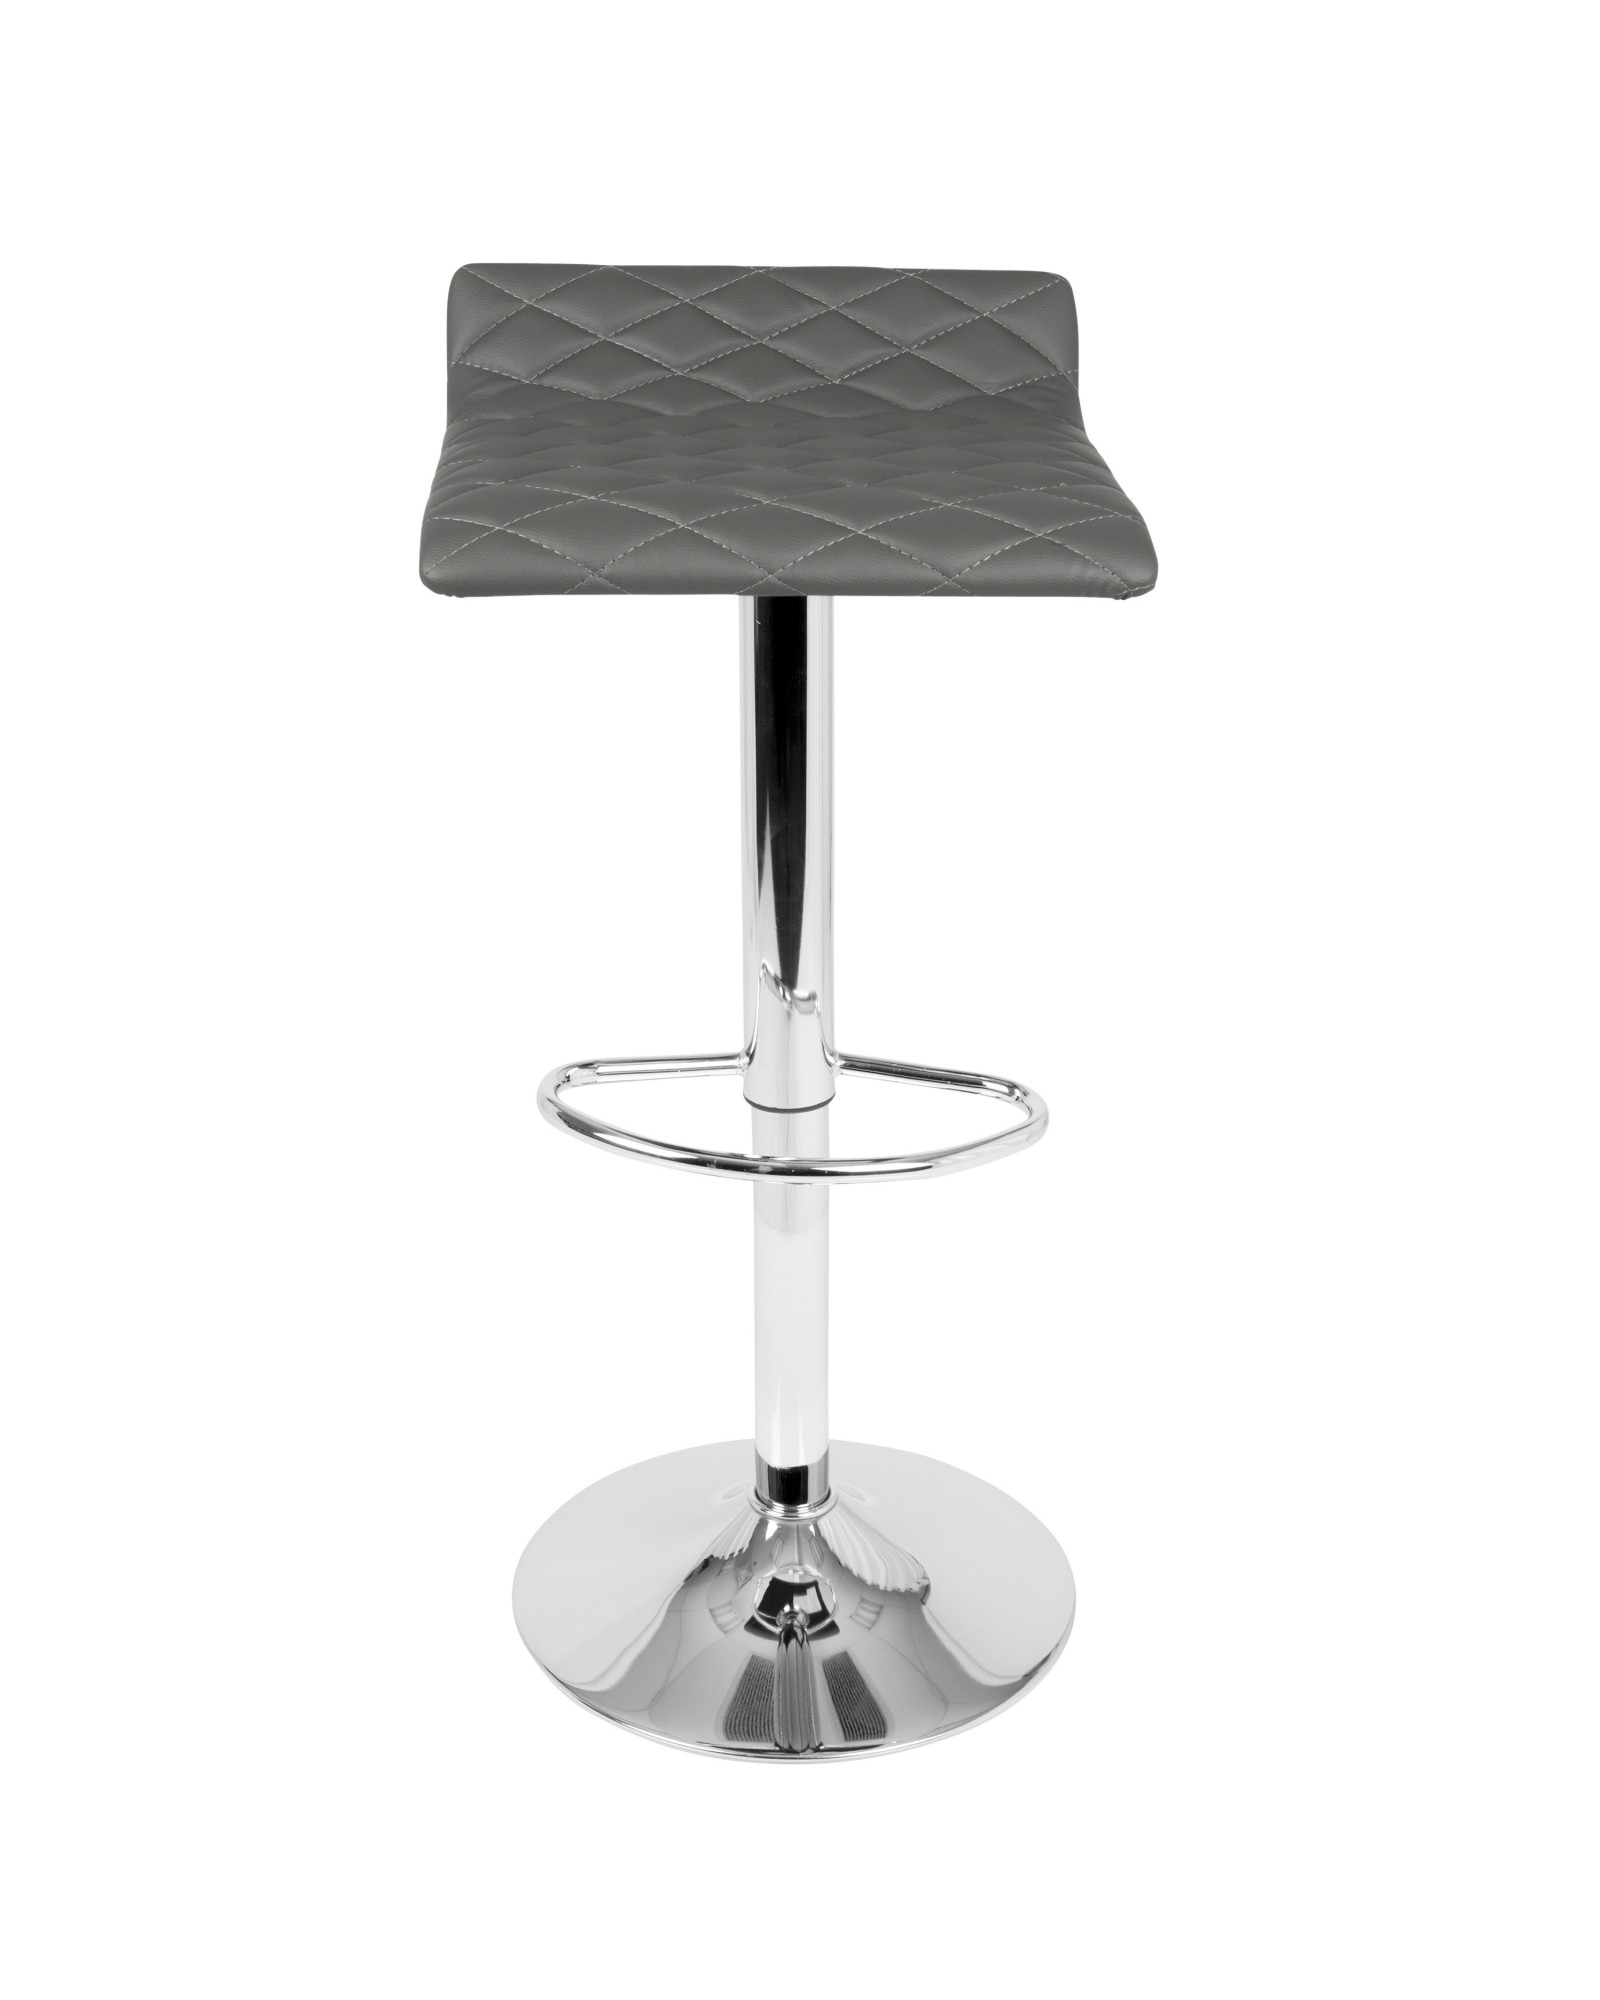 Cavale Contemporary Adjustable Barstool in Grey Faux Leather